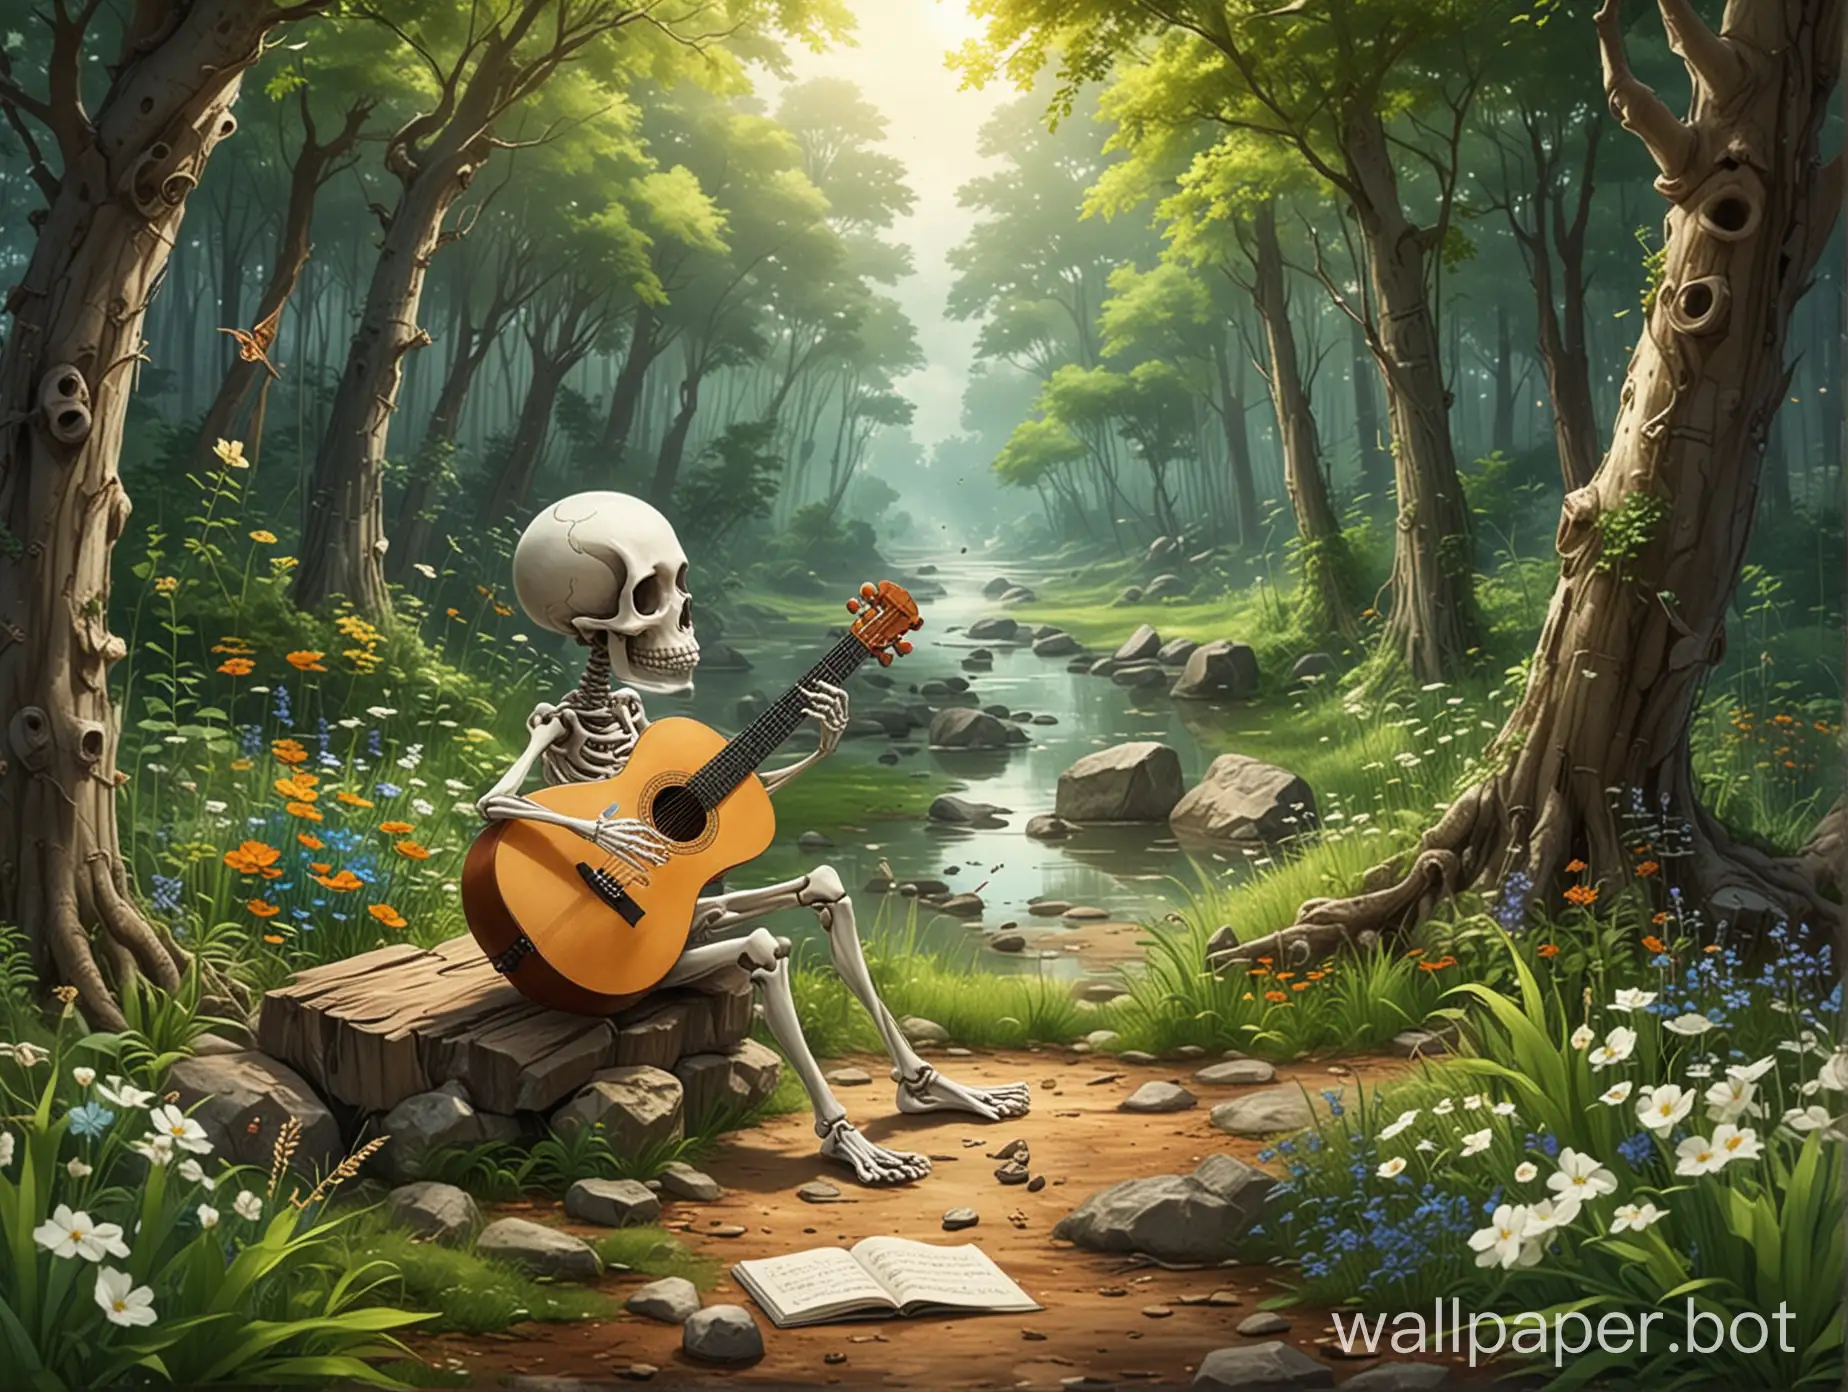 A boney enjoying in the nature relaxing humming a melody song surrounded by the artistic environment canvas and stationary . give me an anime version